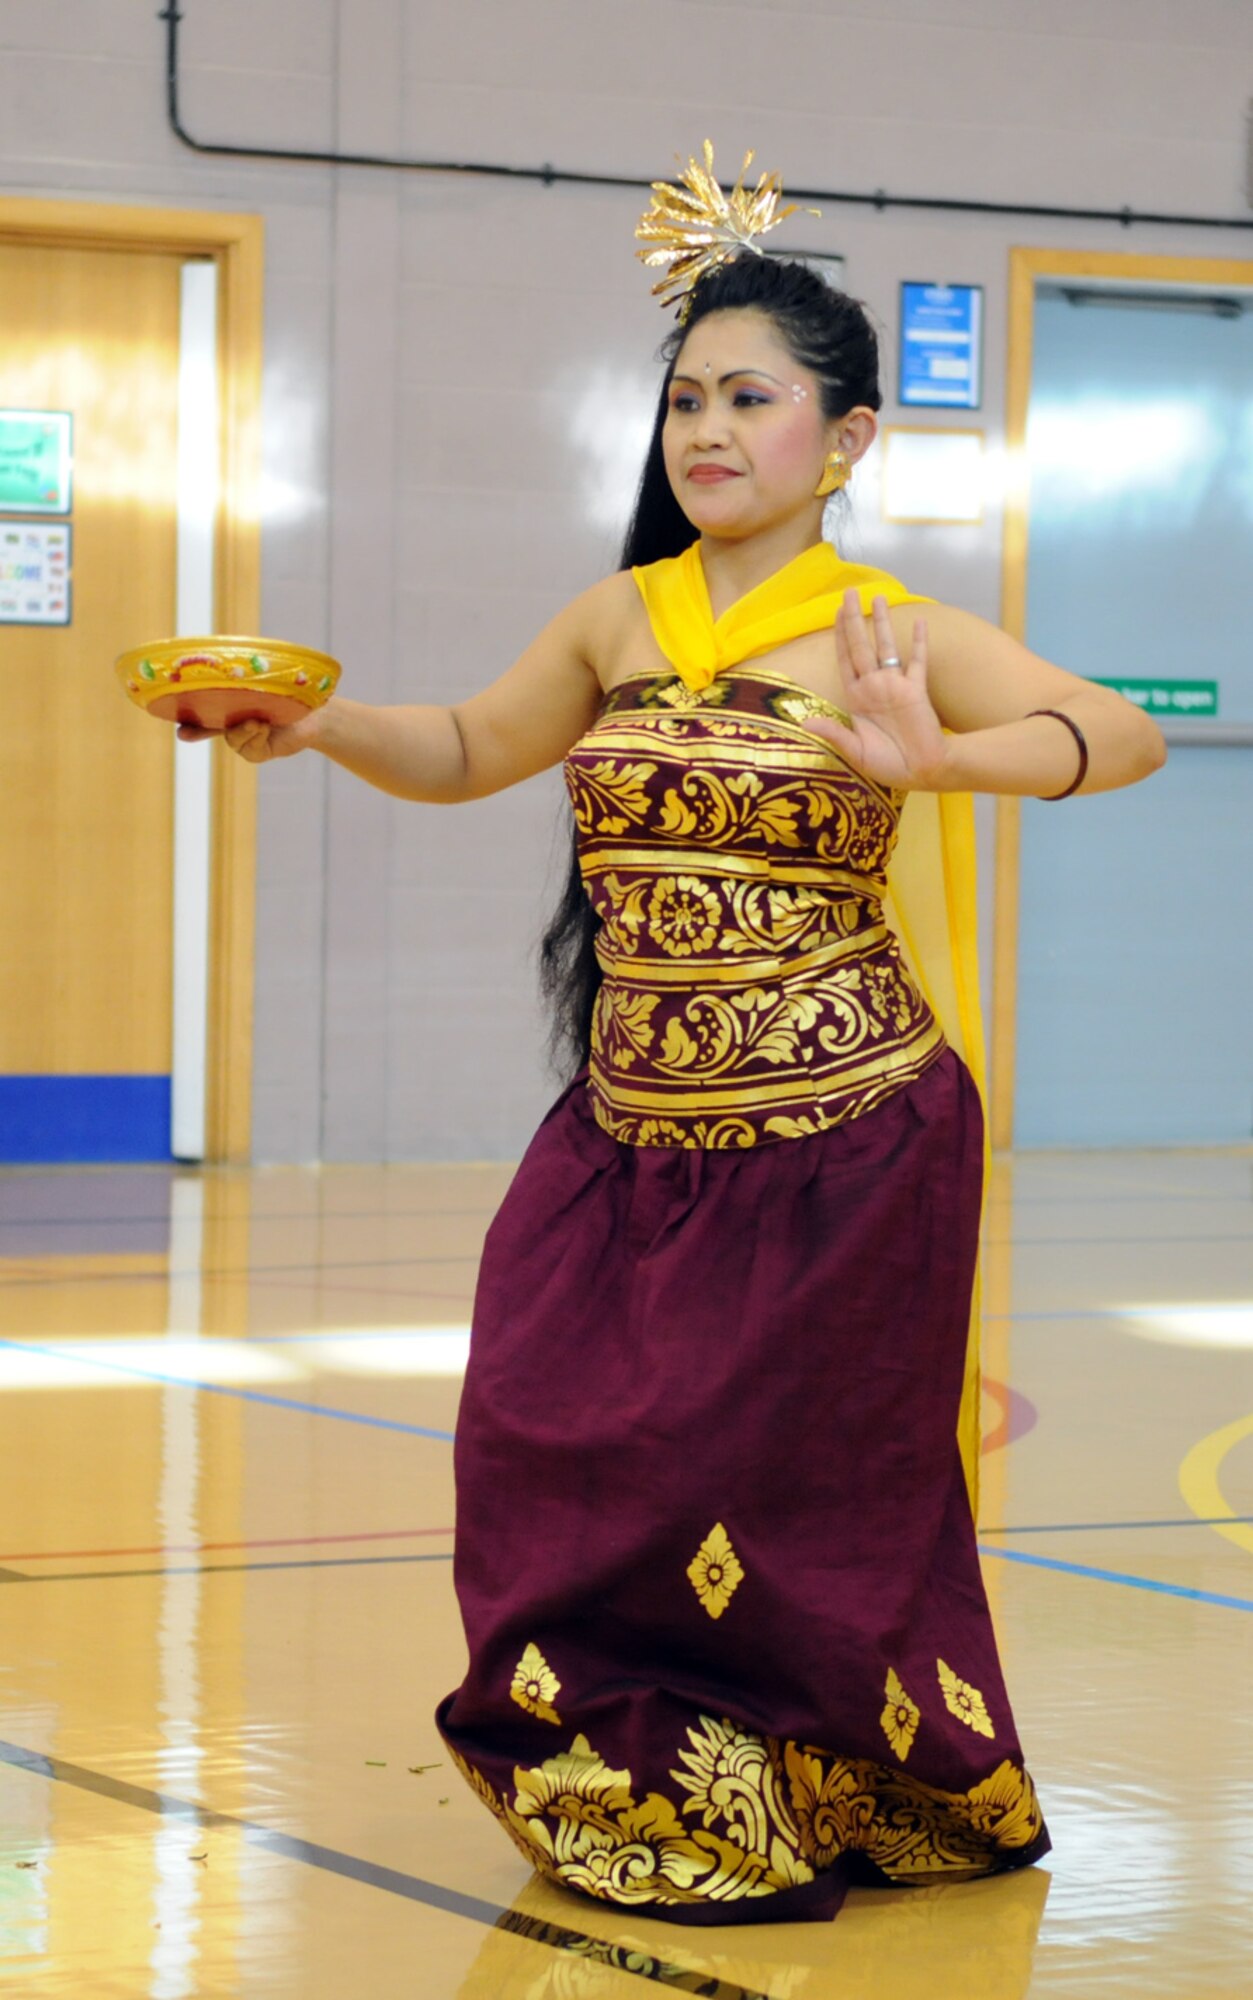 Juli Gusler performs a Balinese dance during a Hearts Apart event May 20.  American and British families of deployed servicemembers were invited to the event to foster a sense of community among military dependents.  (U.S. Air Force photo by Staff Sgt. Austin M. May)